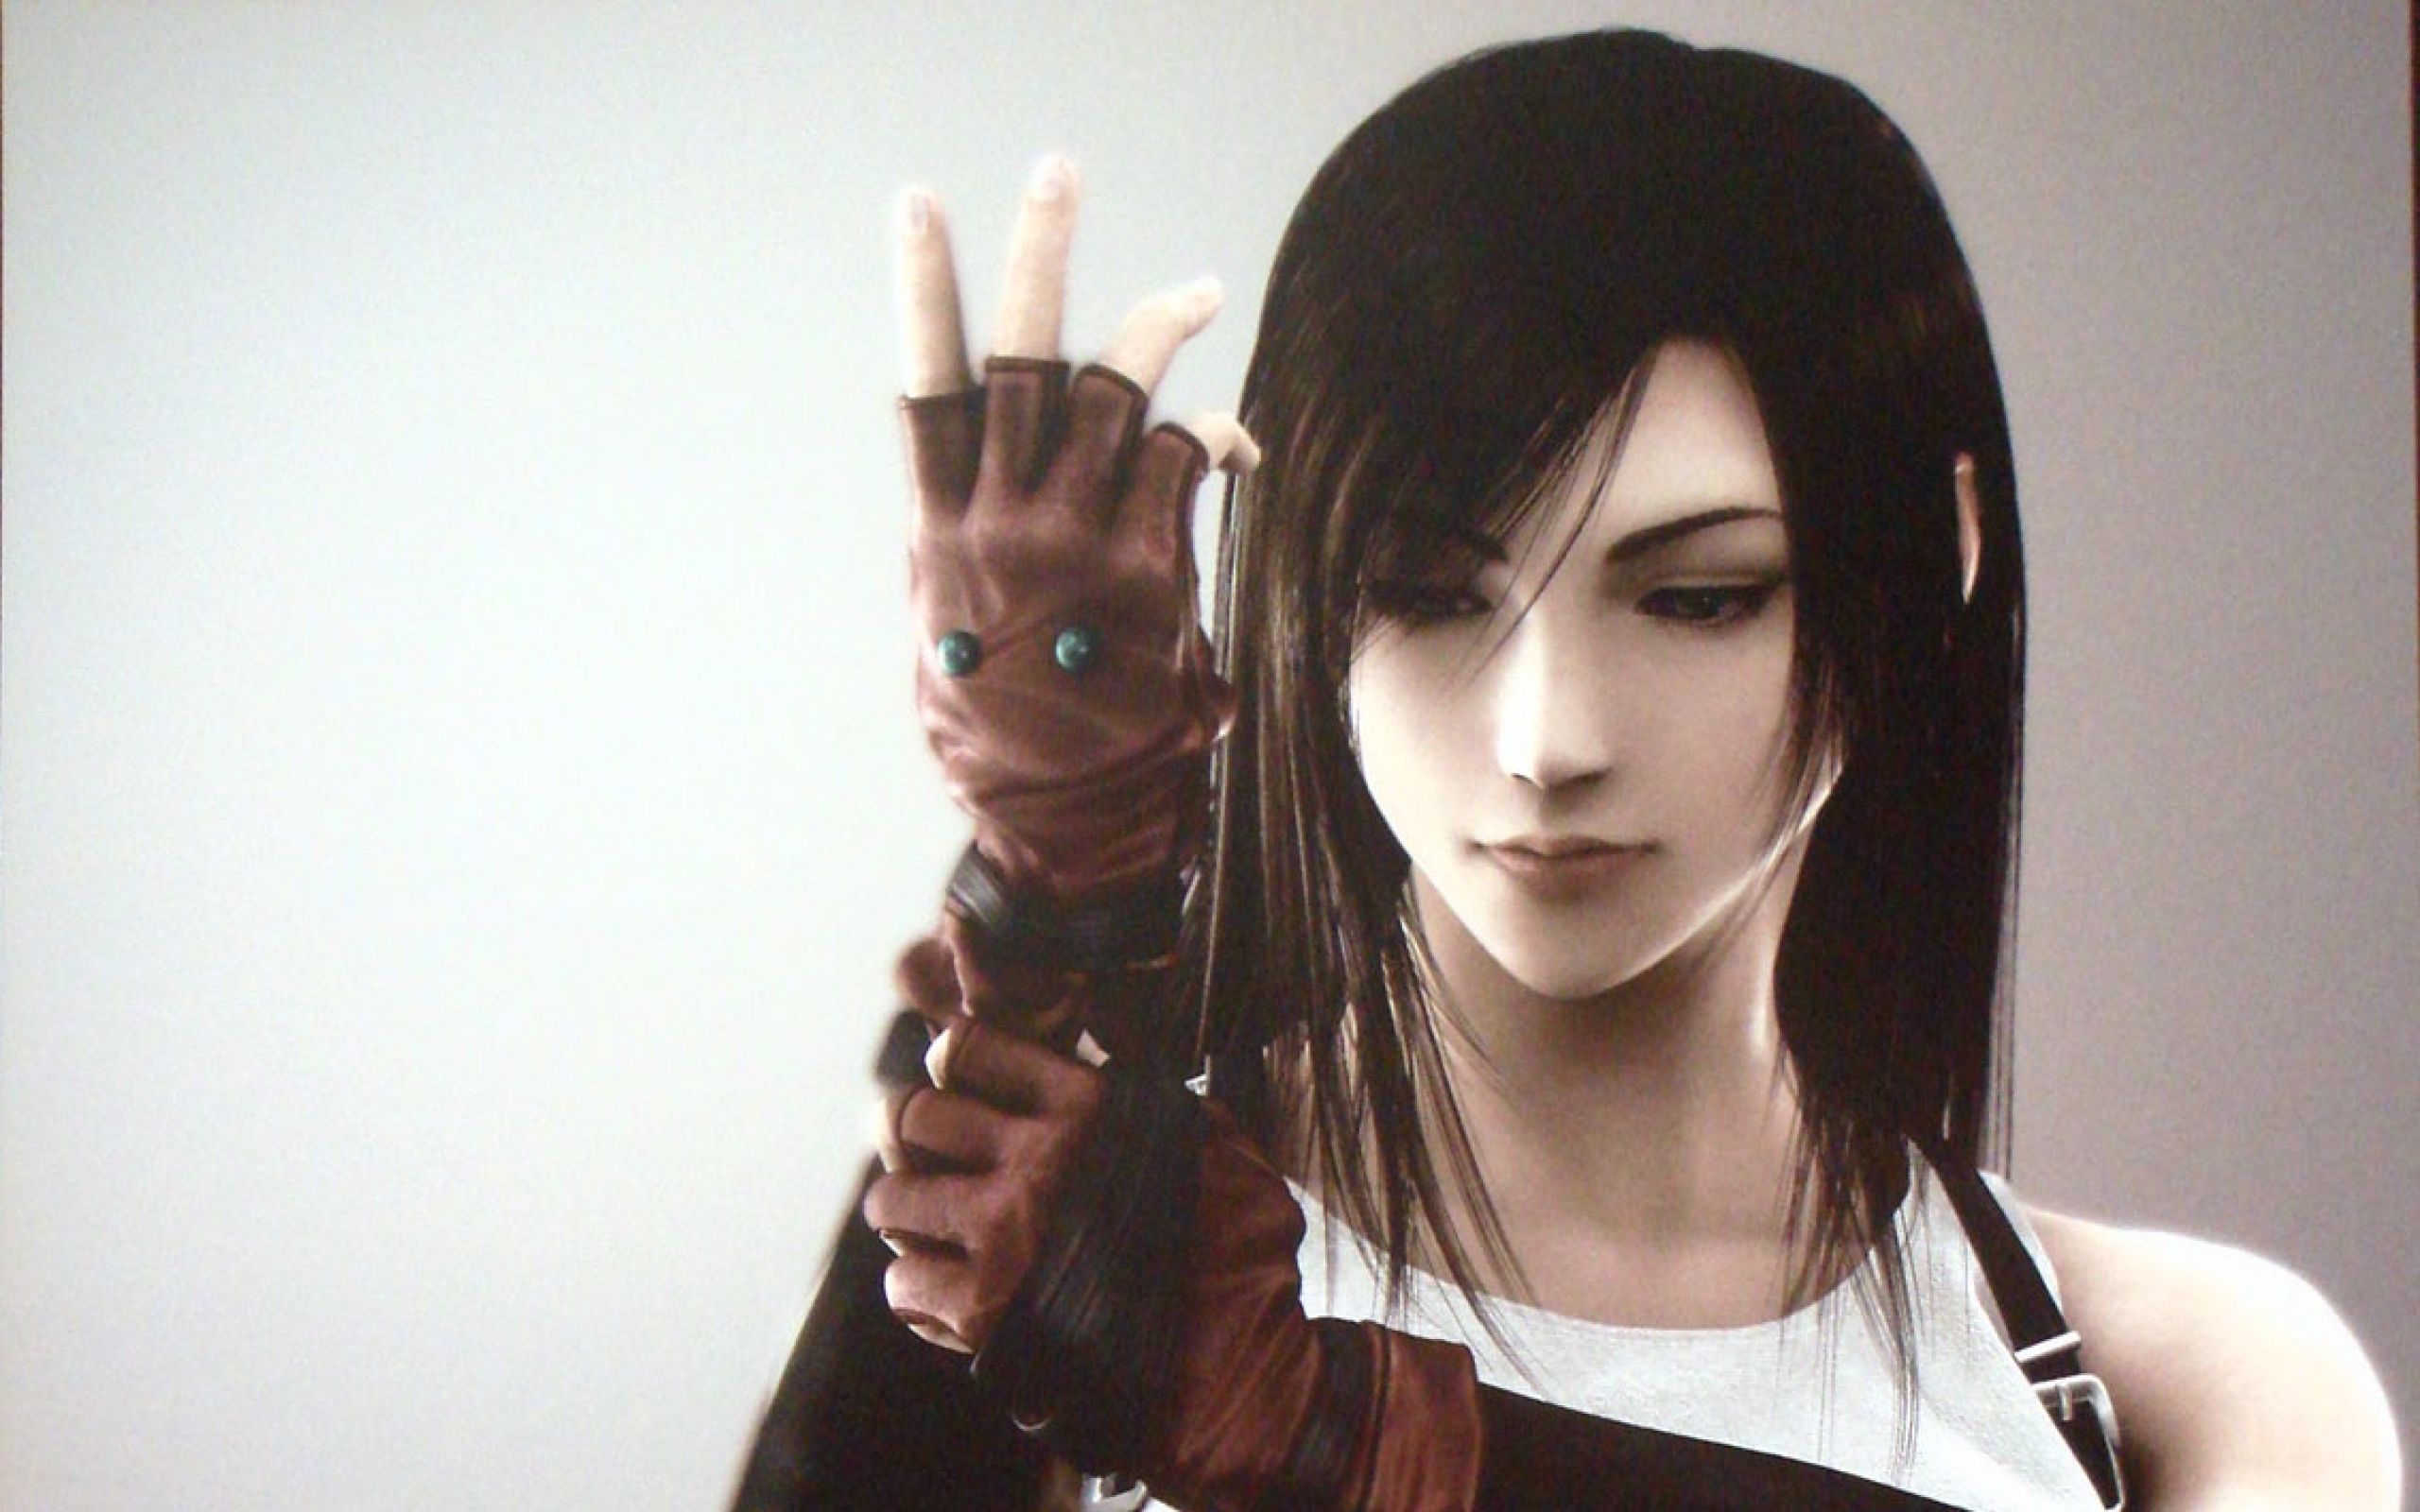 Free download final fantasy 7 tifa wallpaper which is under